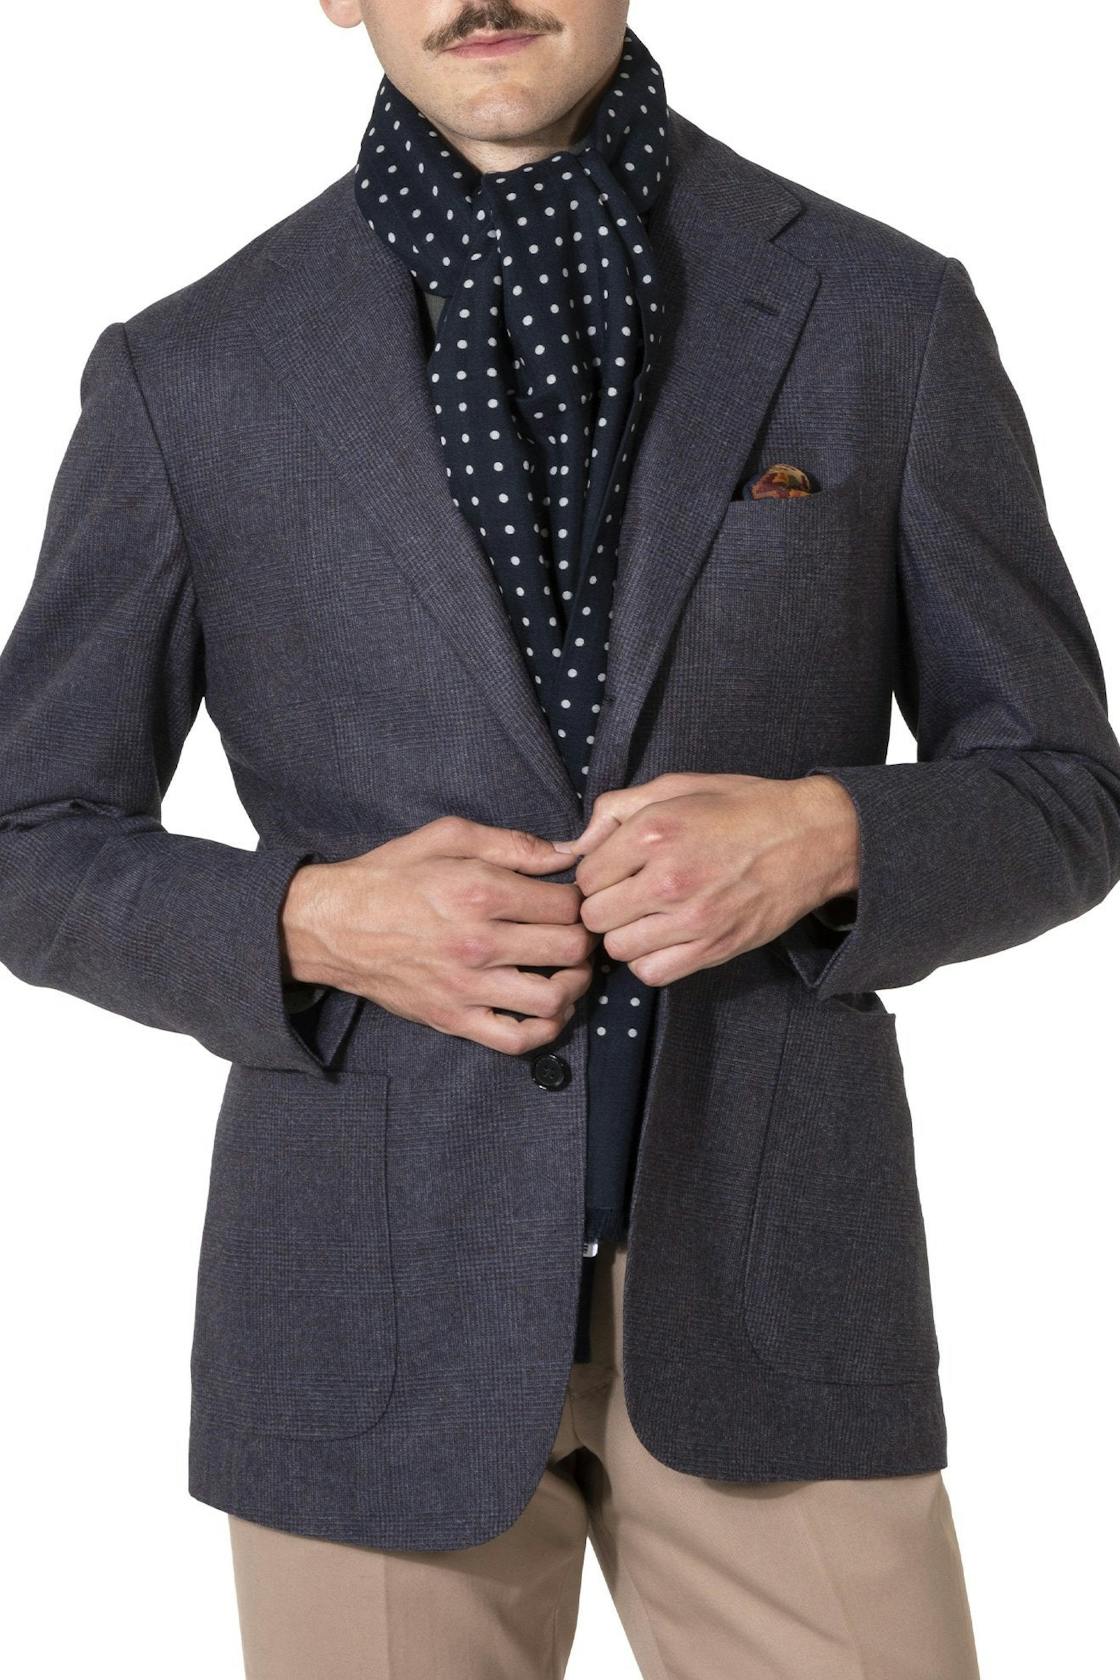 The Armoury by Ring Jacket Model 3 Blue-Grey Wool Prince of Wales Sport Coat